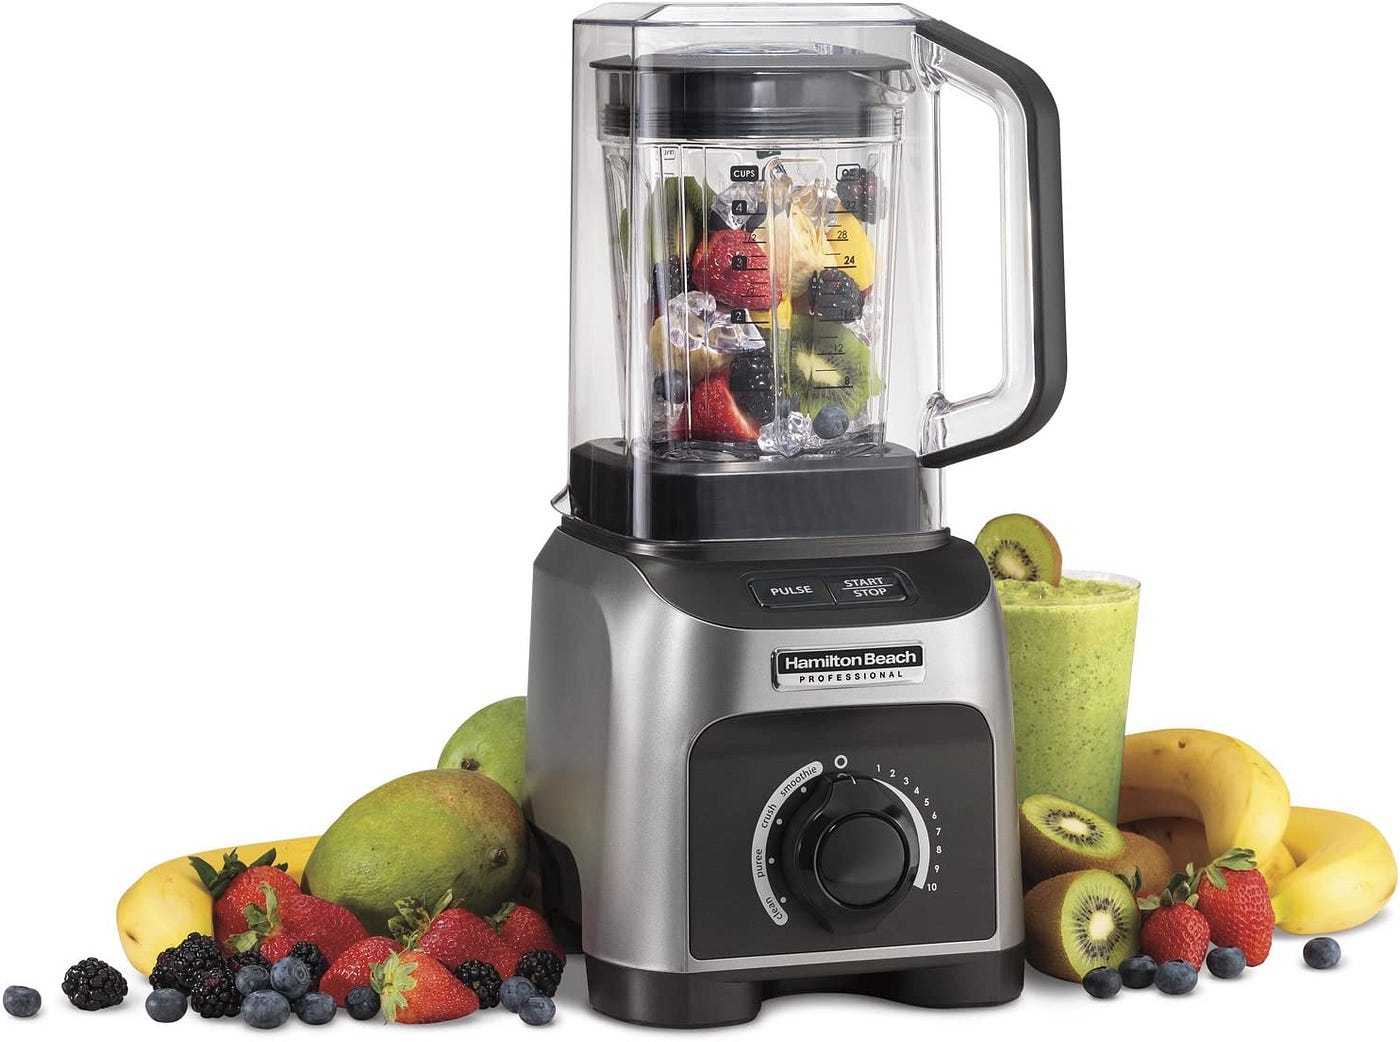 What are the best blenders according to ratings and experts?, by Amy  Cuevas Schroeder